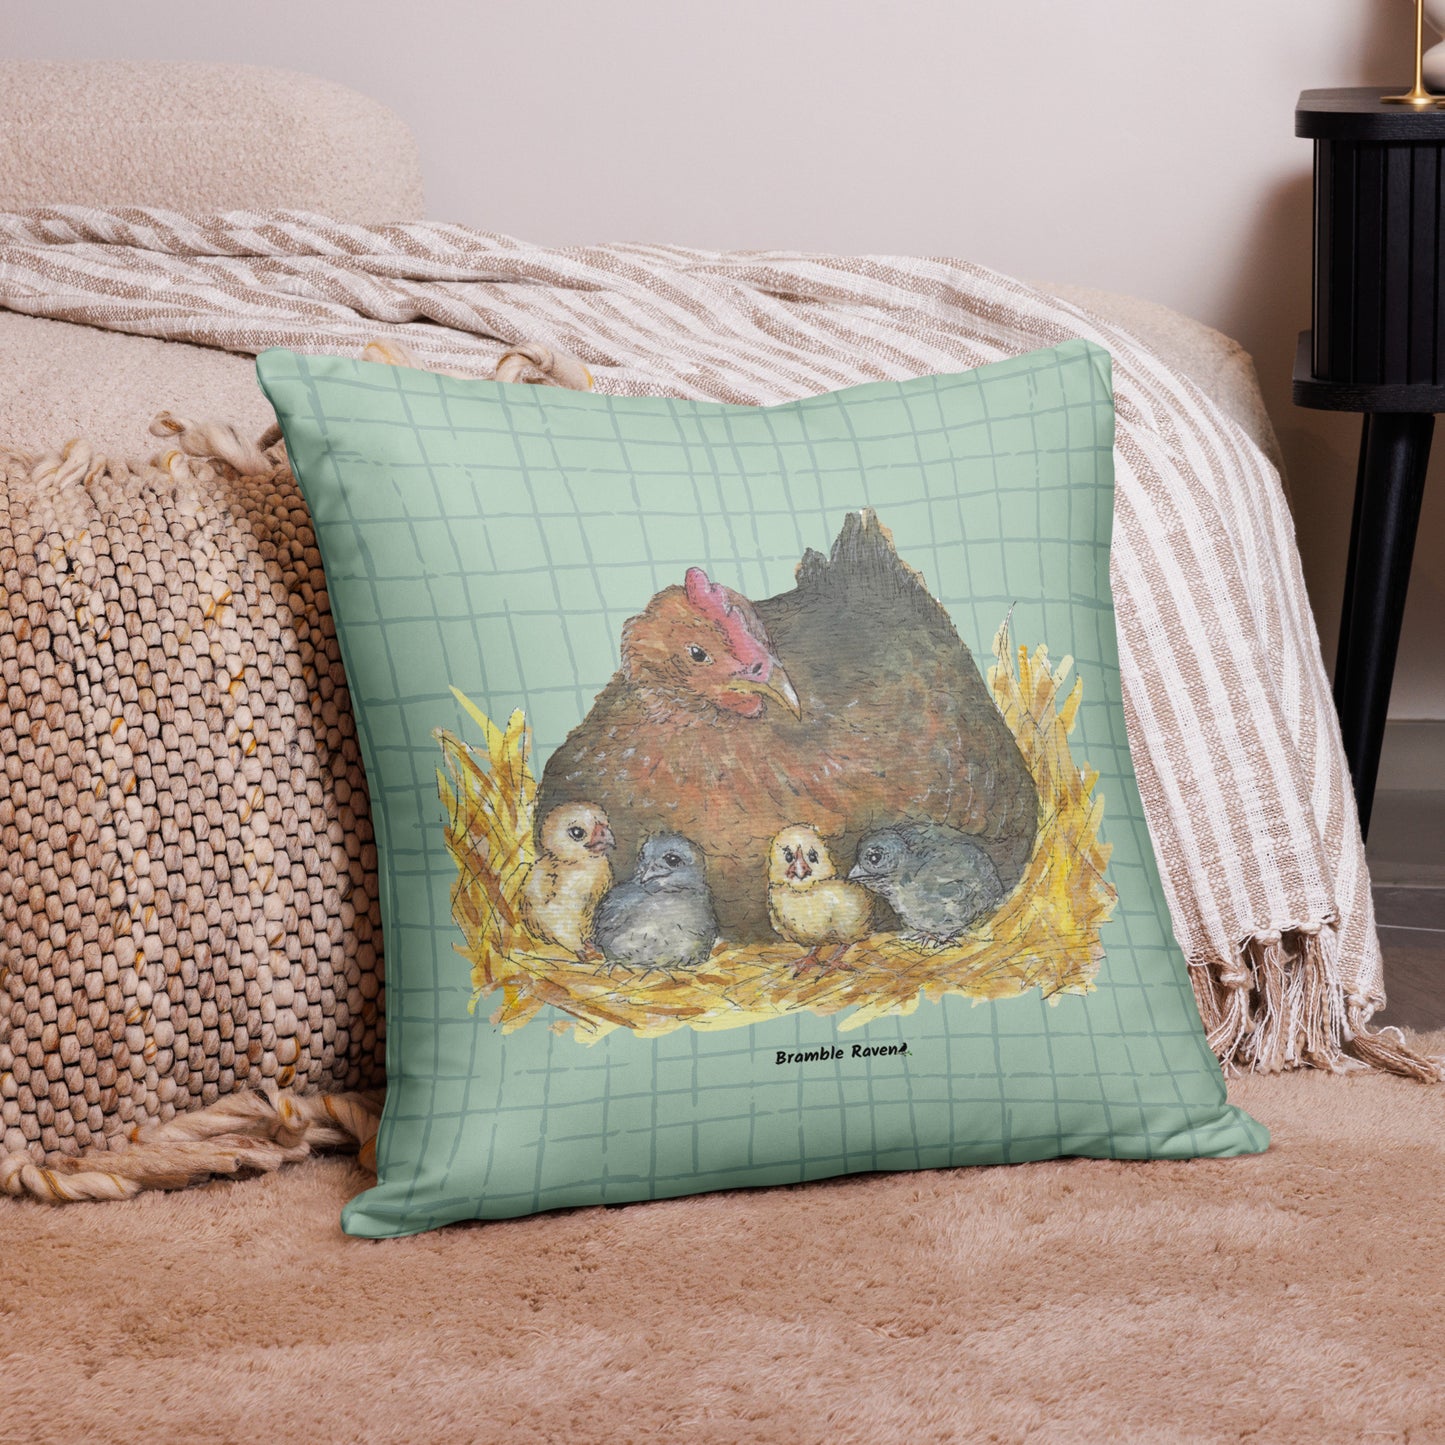 22 by 22 inch mother hen decorative throw pillow. Features Heather Silver's watercolor print of a mother hen and chicks on a green cross-hatched background. Image printed on both sides. Has a hidden zipper and washable cover. Comes with shape-retaining insert. Shown on tan carpet by beige bed.